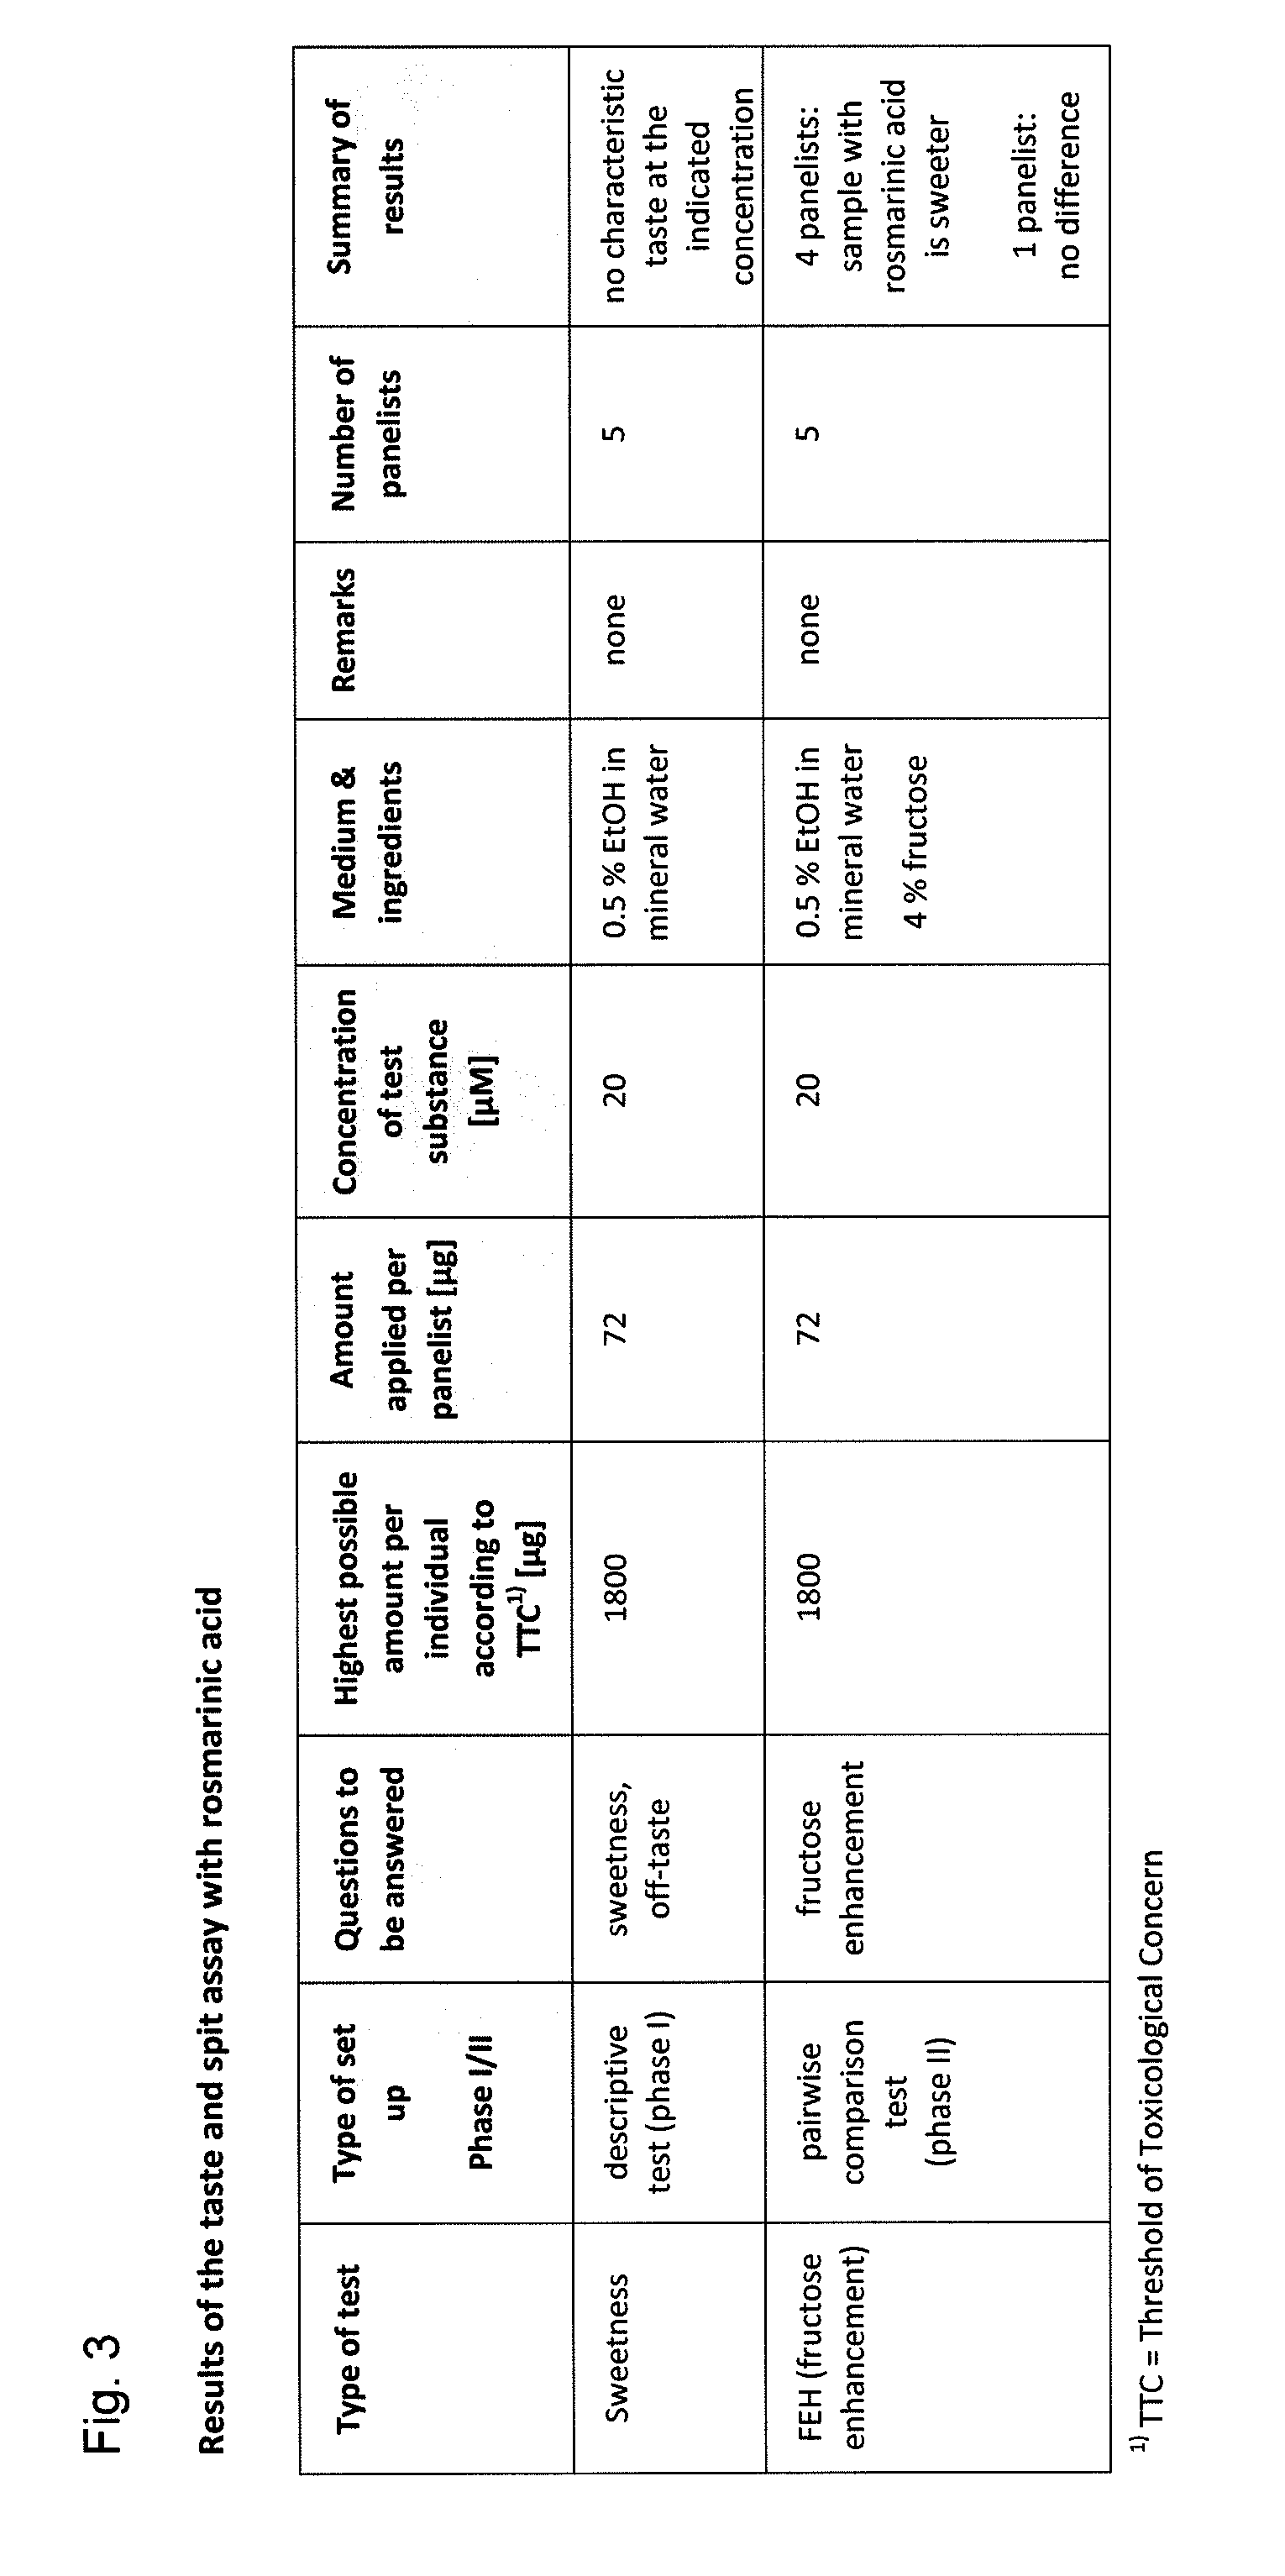 Sweetness enhancer, sweetener compositions, methods of making the same and consumables containing the same